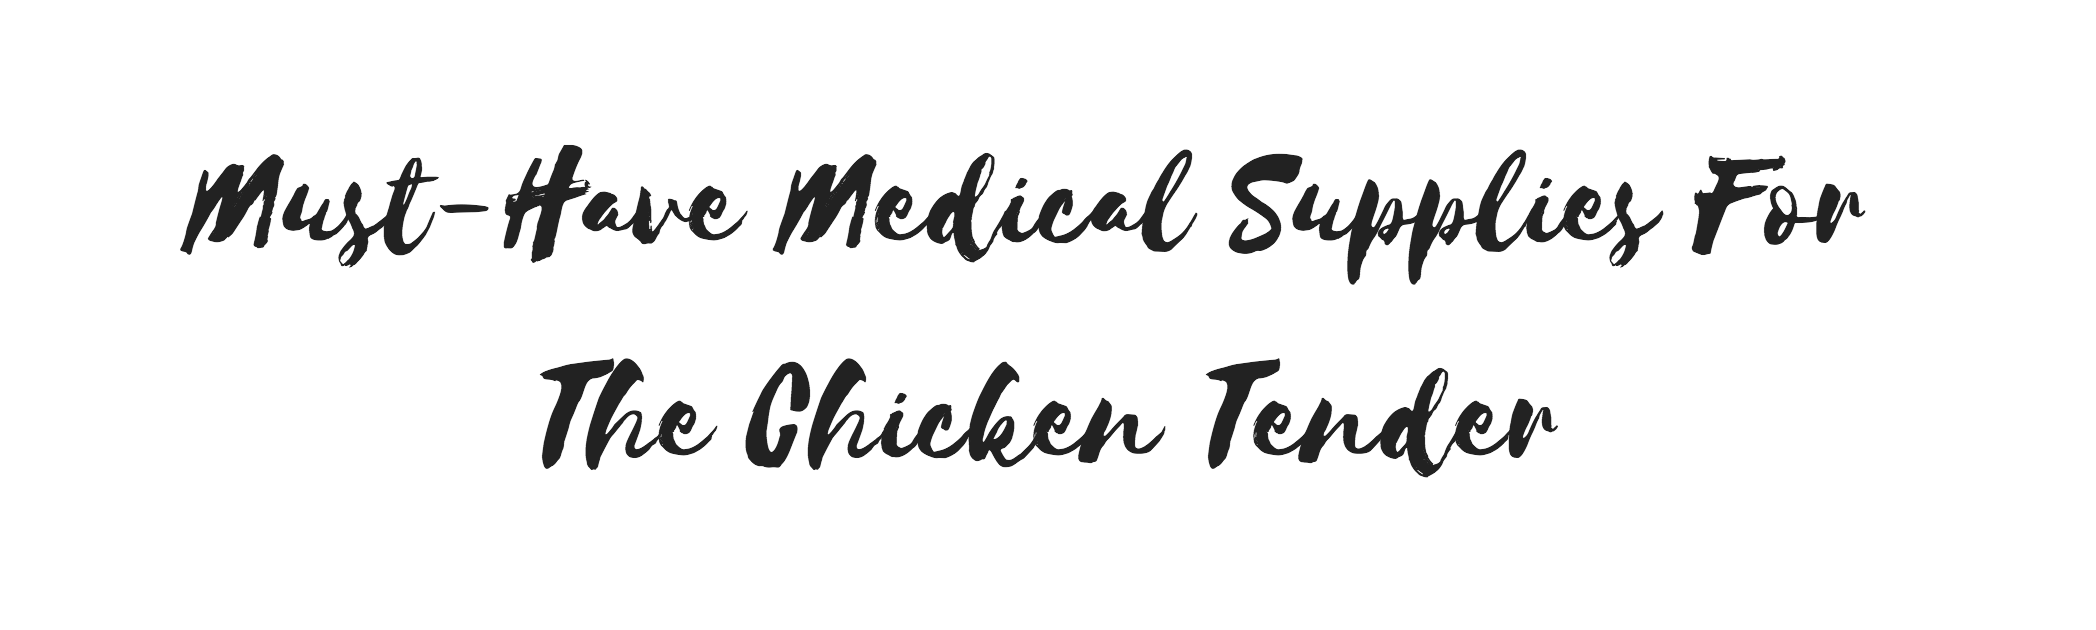 must-have medical supplies for the chicken tender